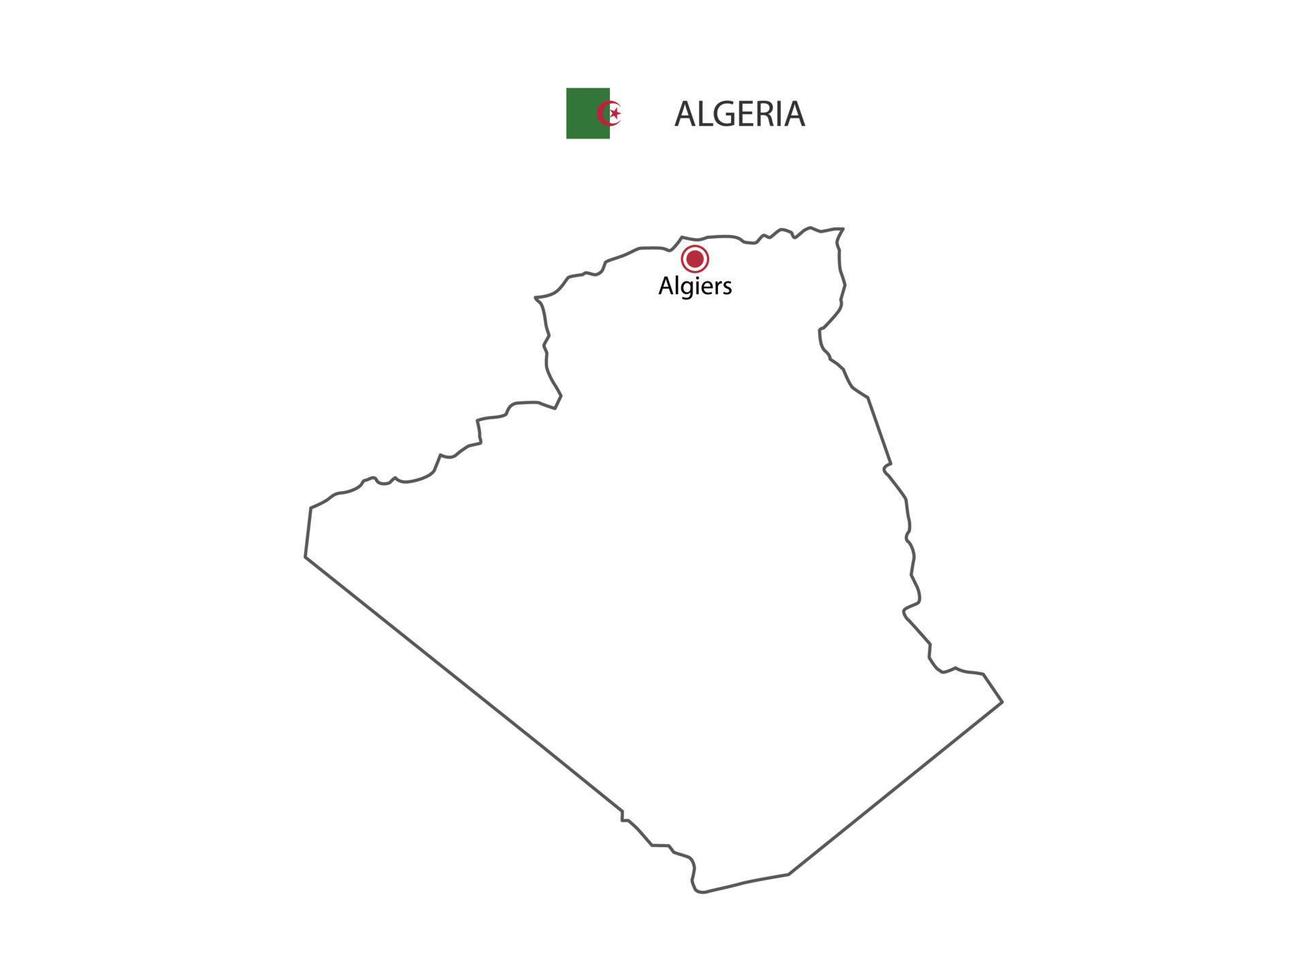 Hand draw thin black line vector of Algeria Map with capital city Algiers on white background.